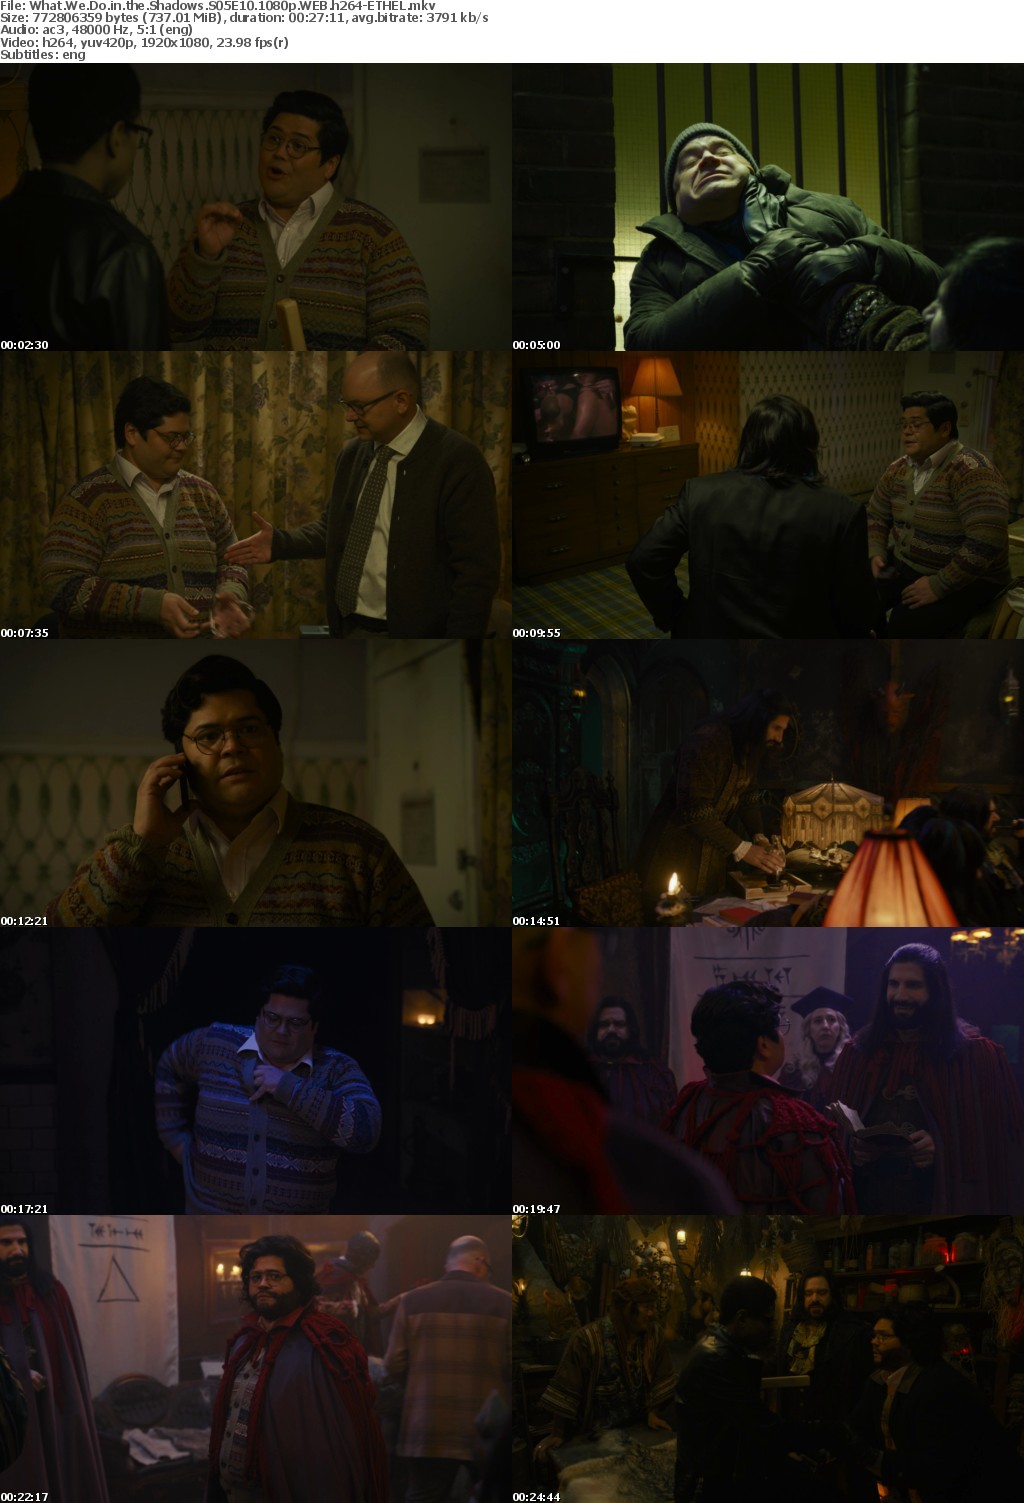 What We Do in the Shadows S05E10 1080p WEB h264-ETHEL